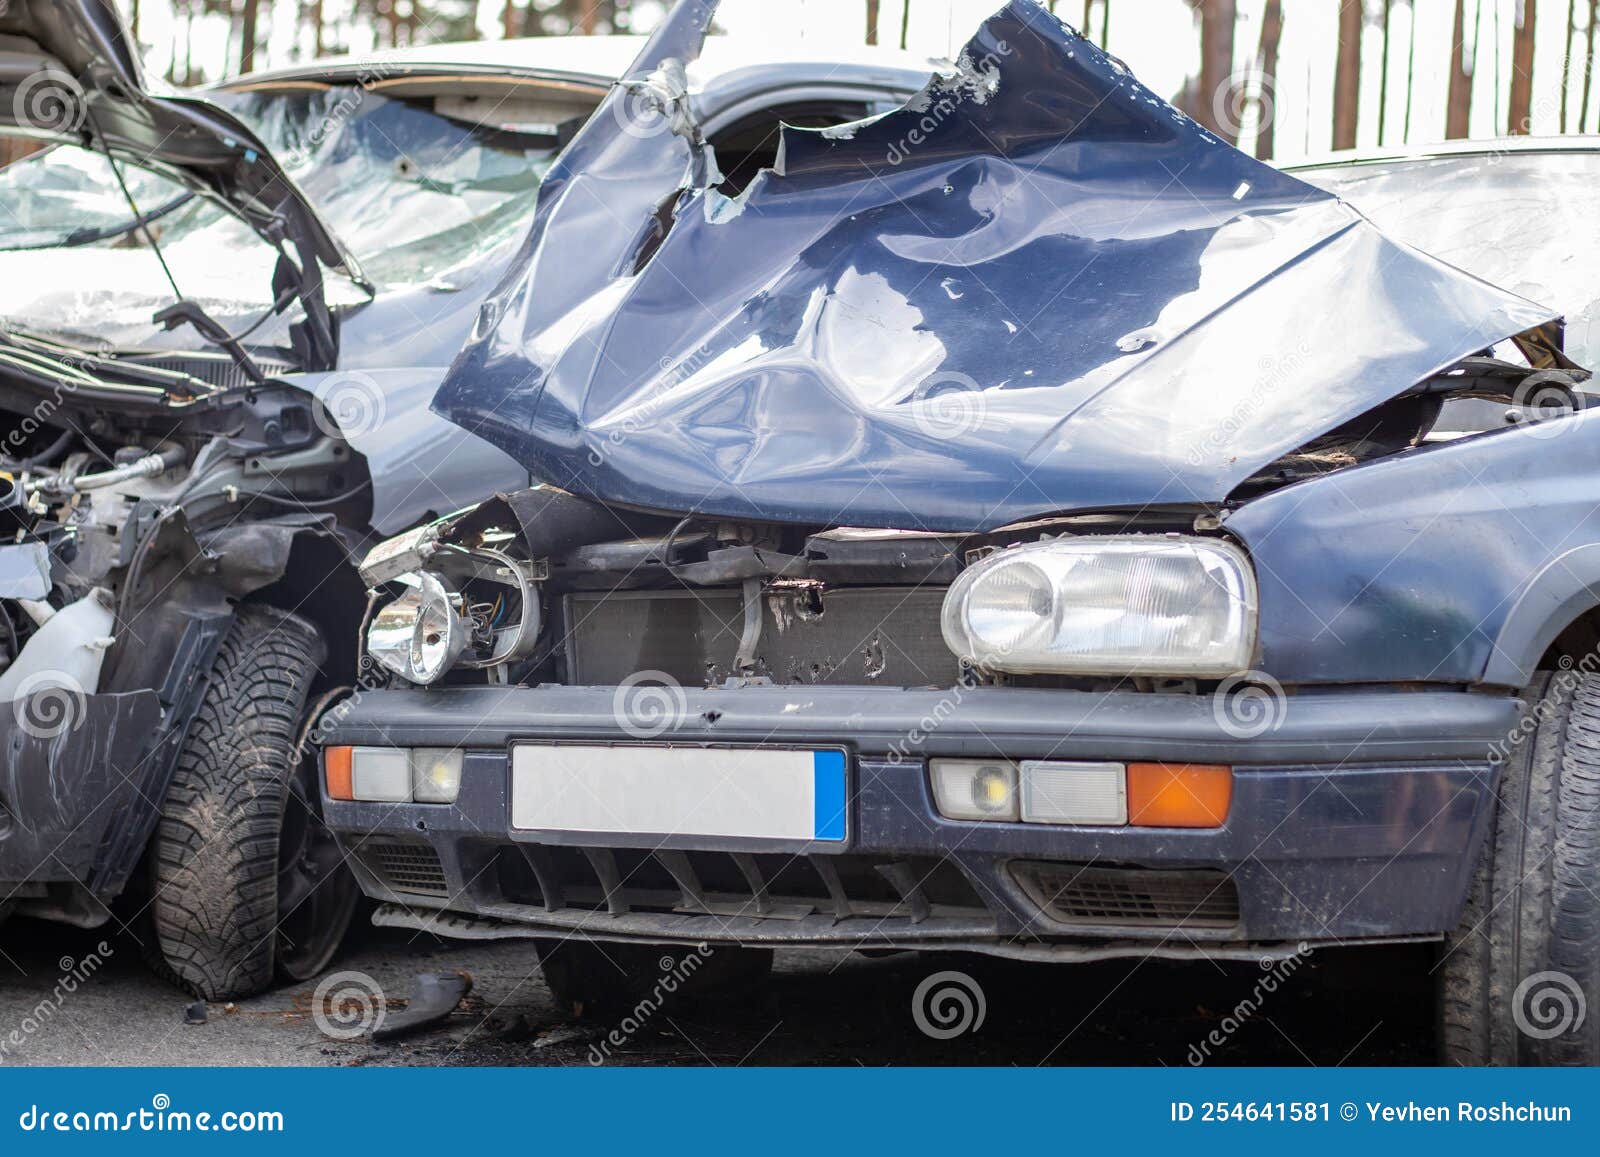 How Does Insurance Cover Parking Lot Accidents?